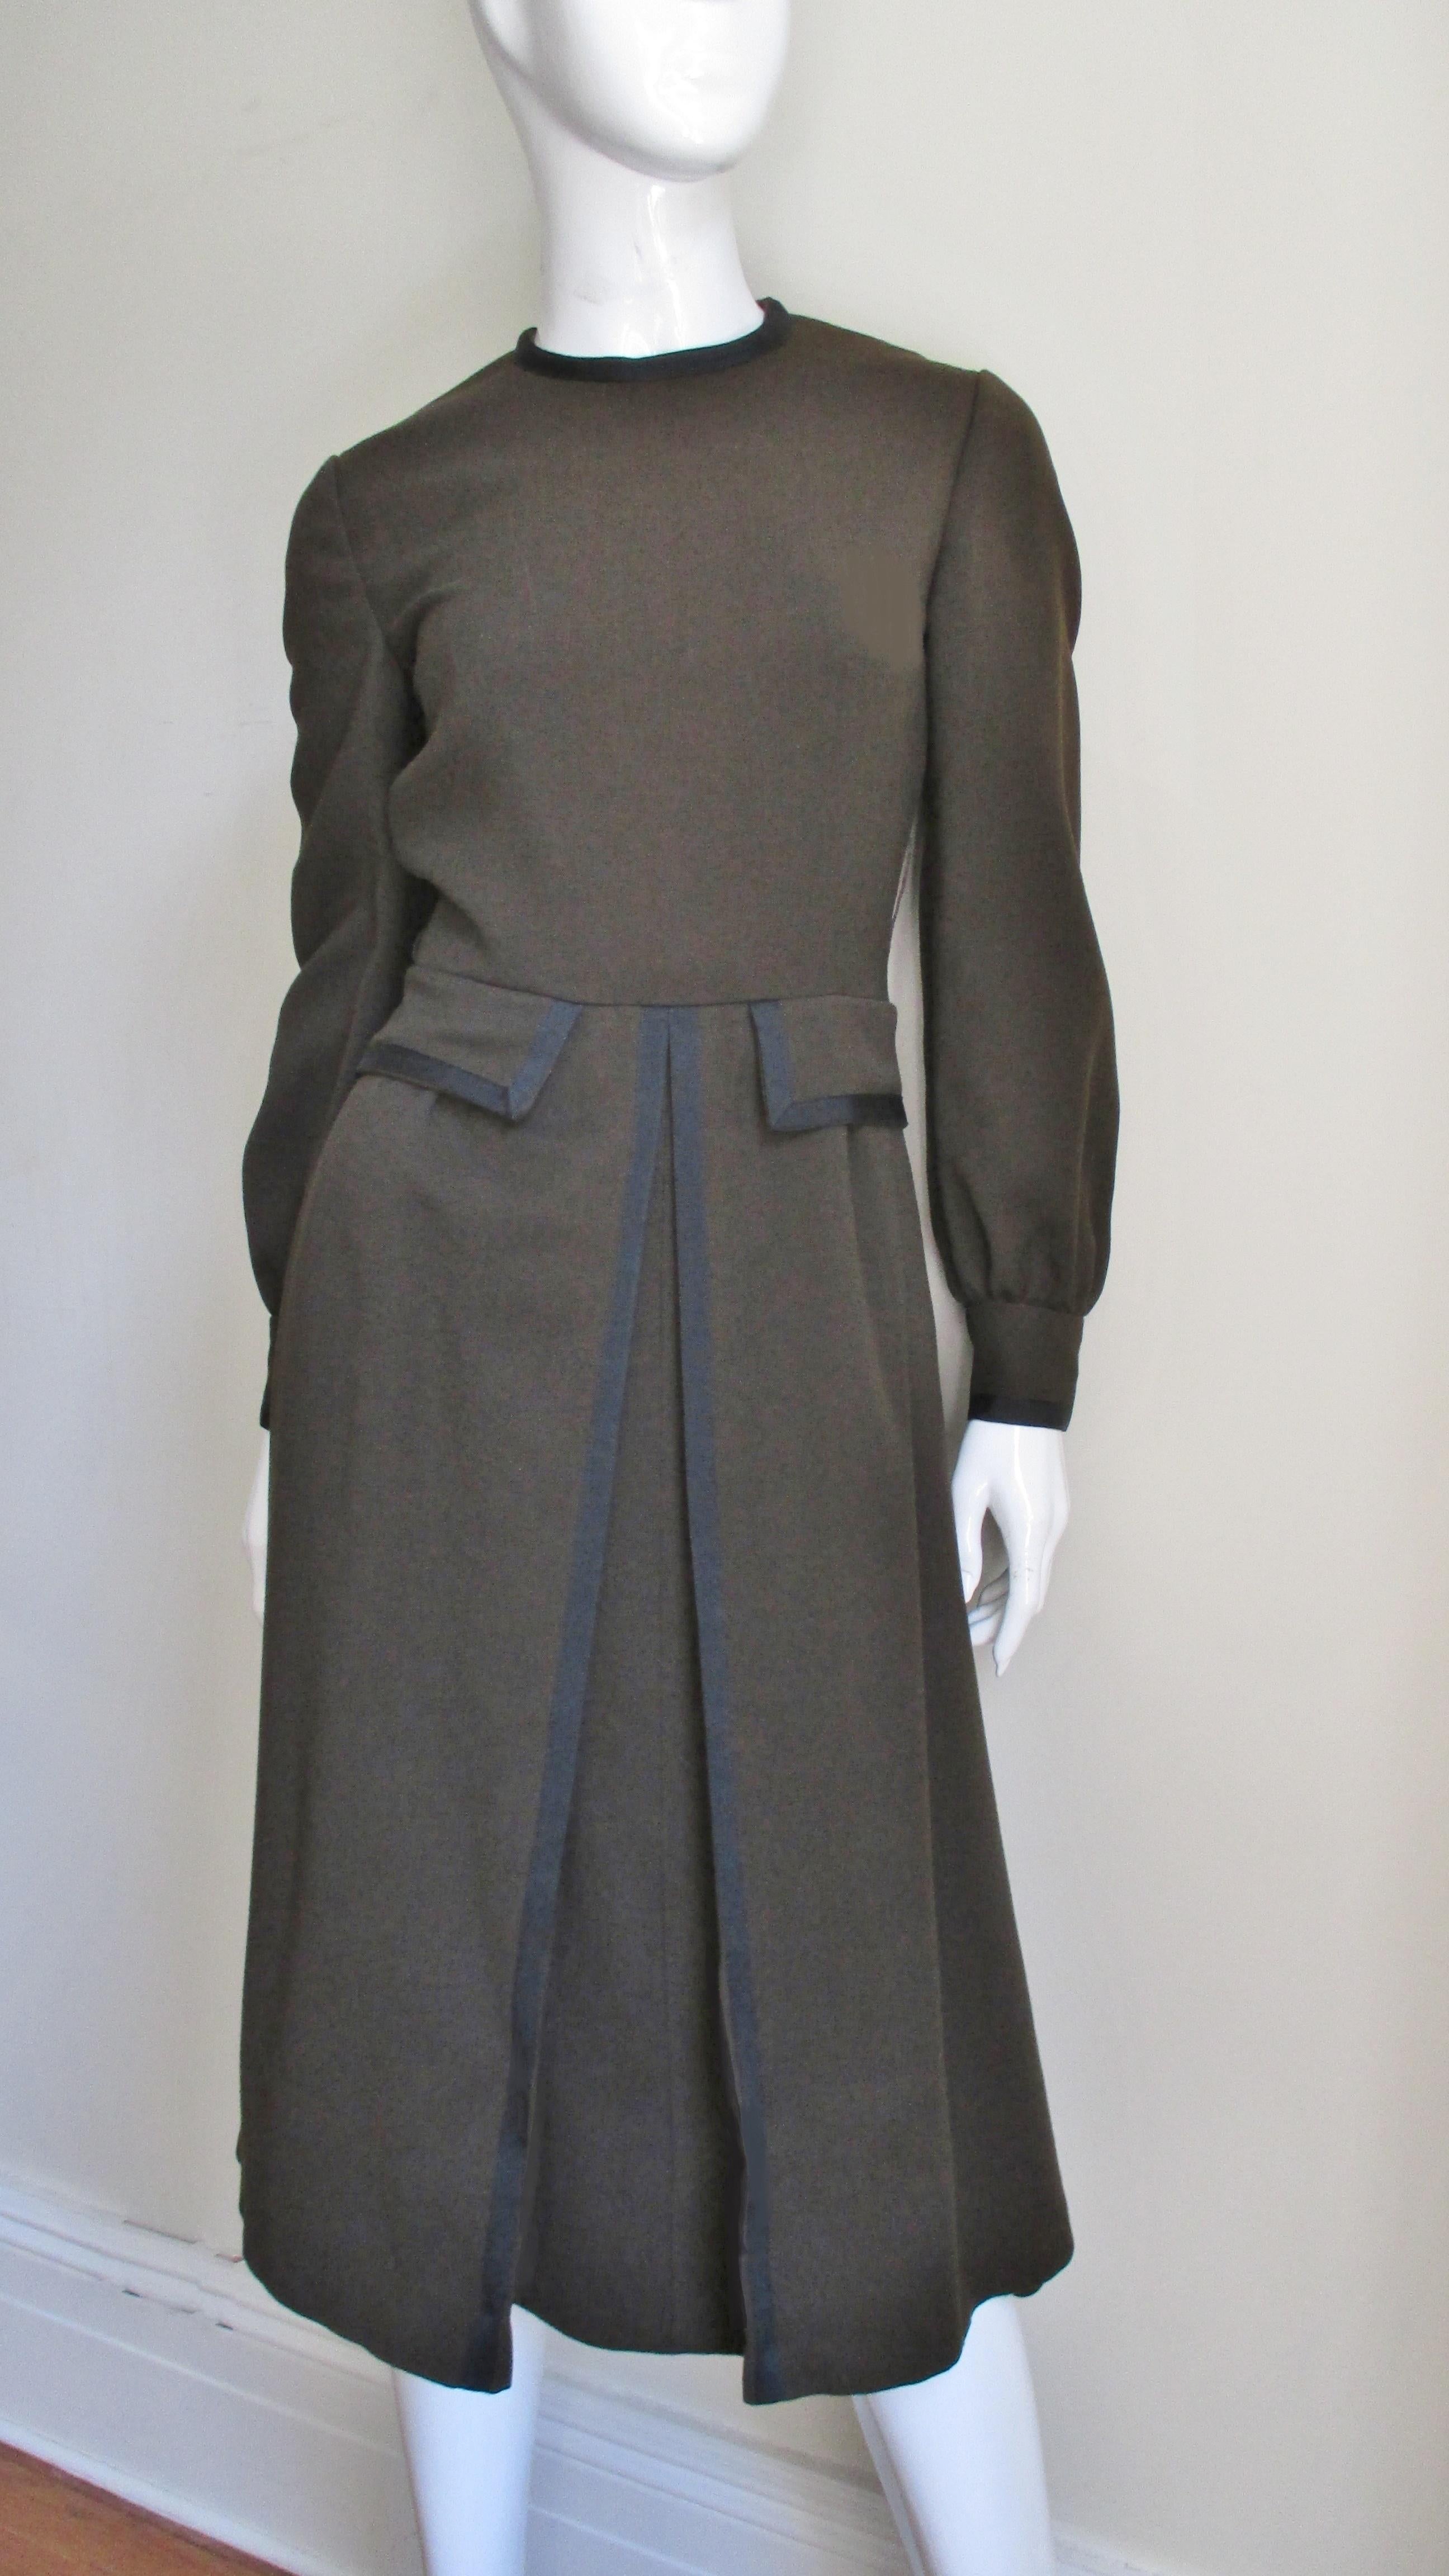 A beautiful brown wool dress with black trim from Geoffrey Beene. It has a crew neckline and long sleeves with black button cuffs. The bodice has pocket flaps at the waist and functional pockets in the skirt side seams.  The A line skirt has an